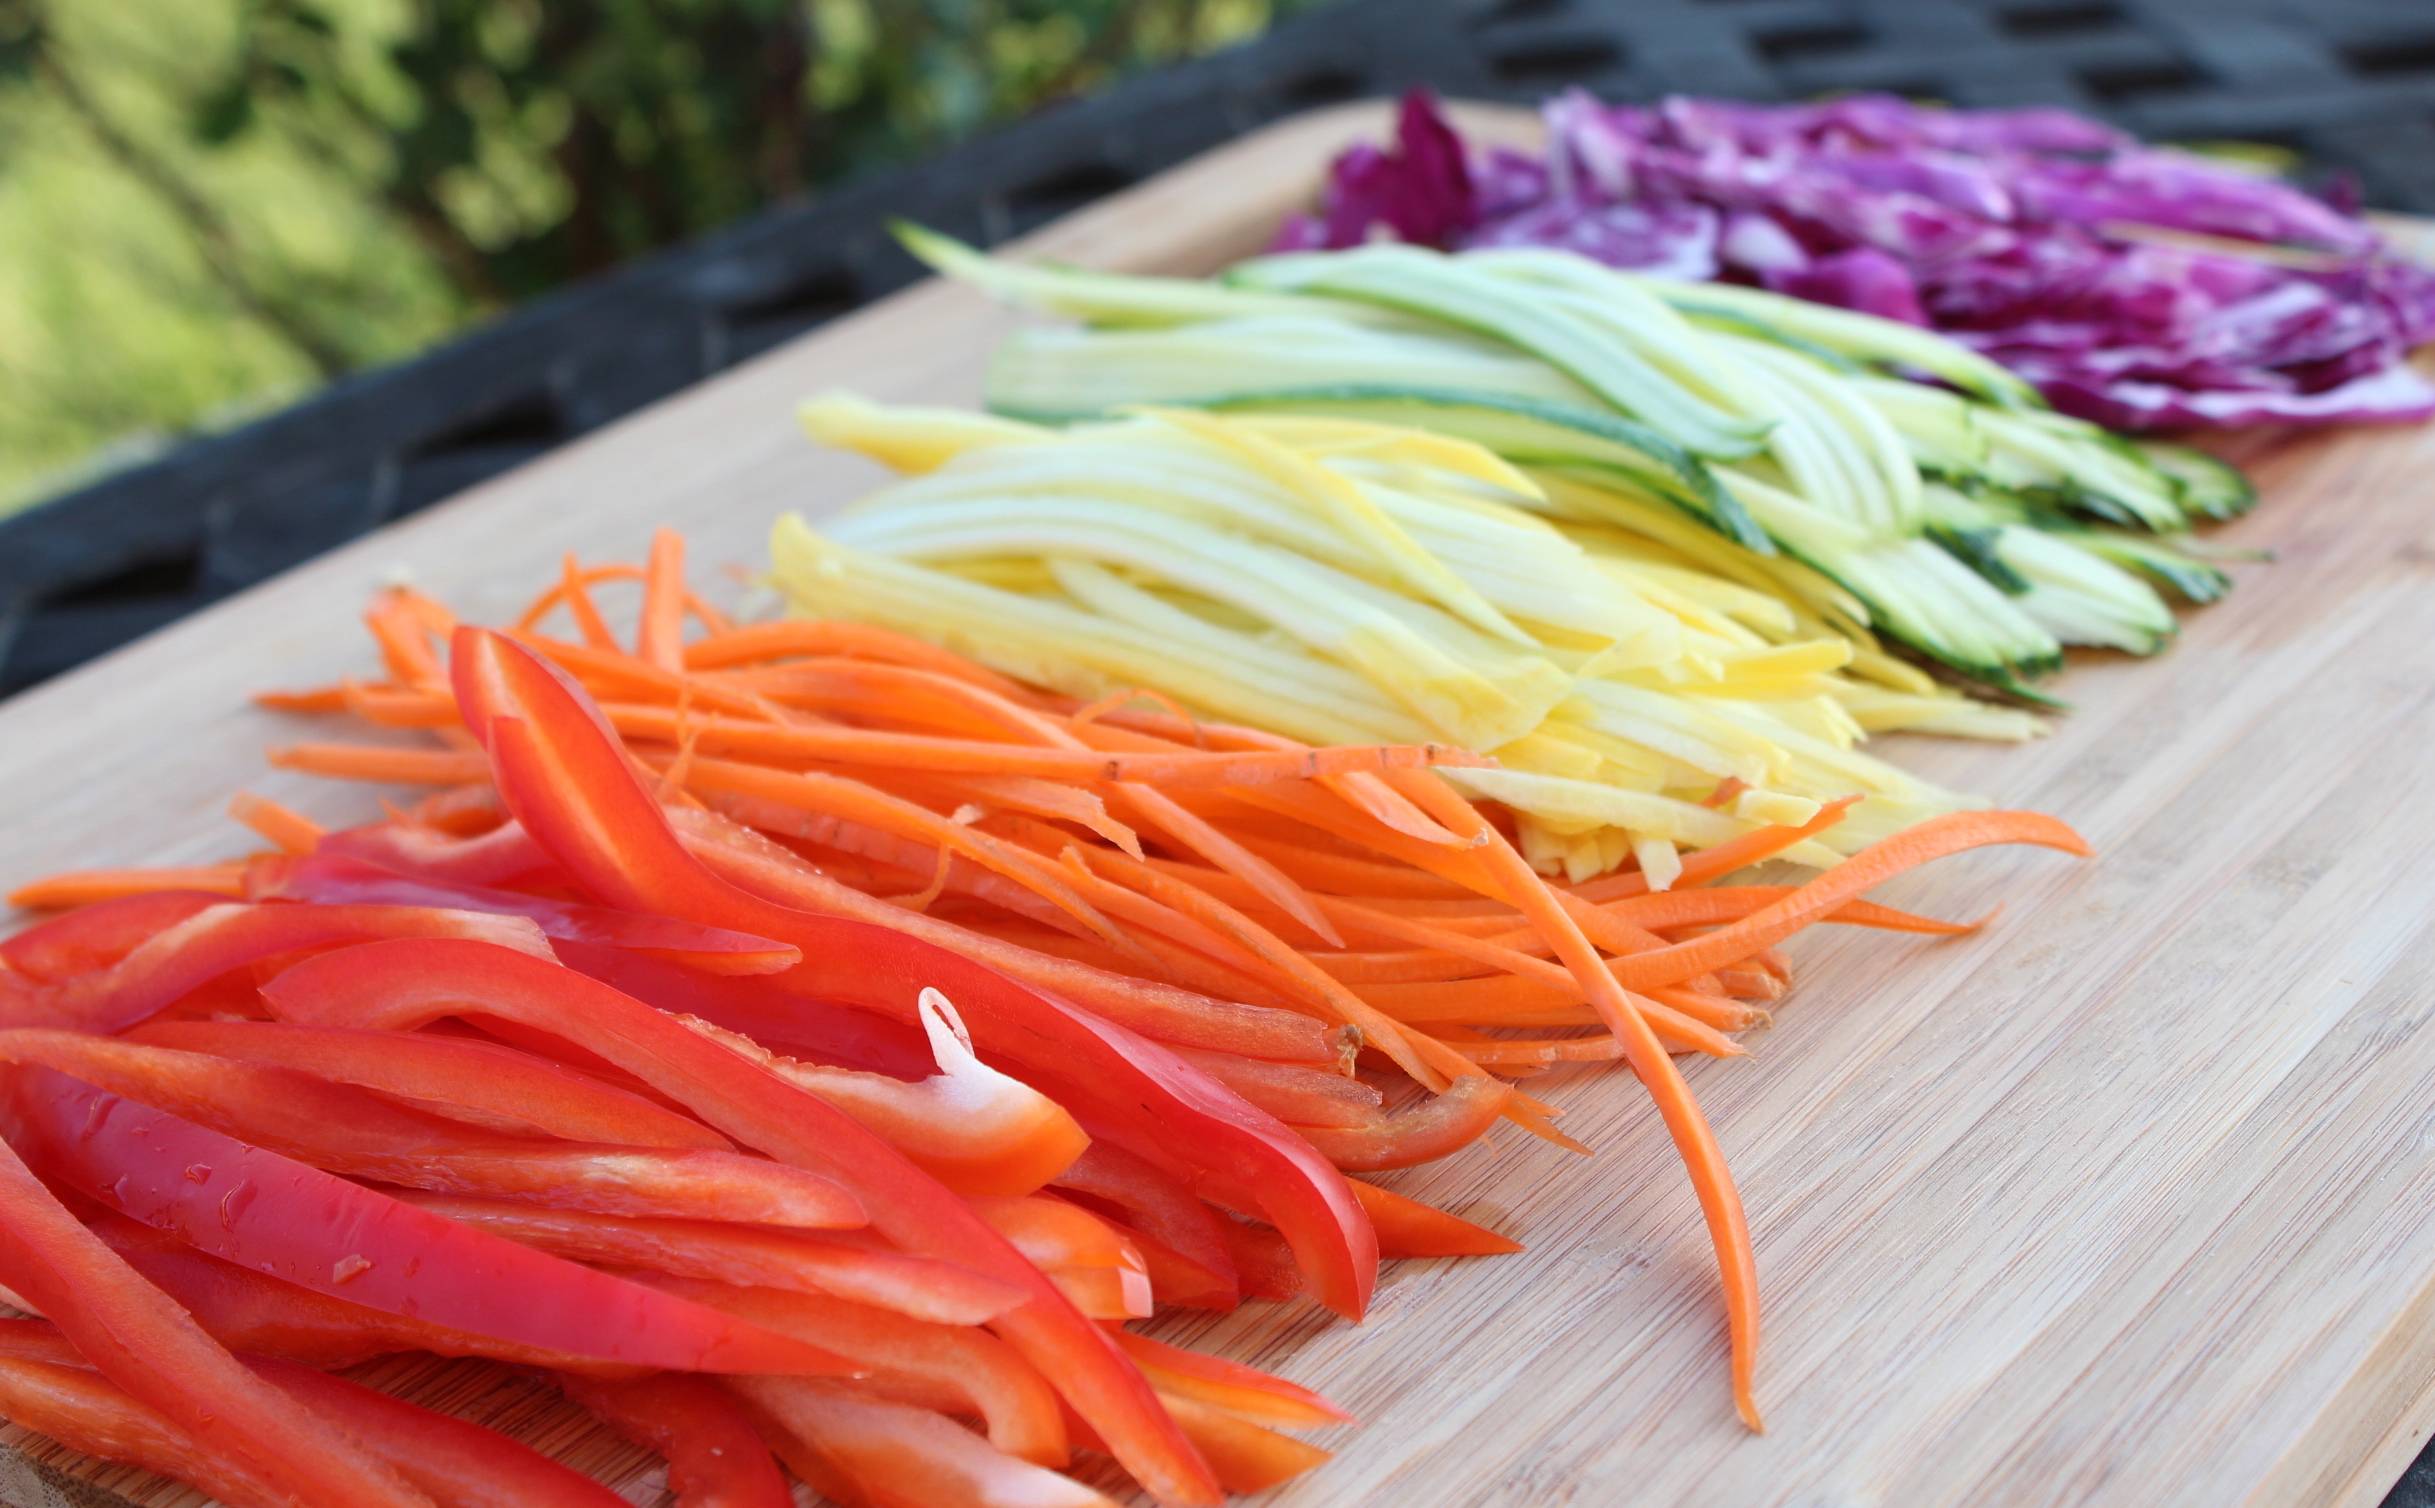 To Cook julienne or not to cook. That's the question.